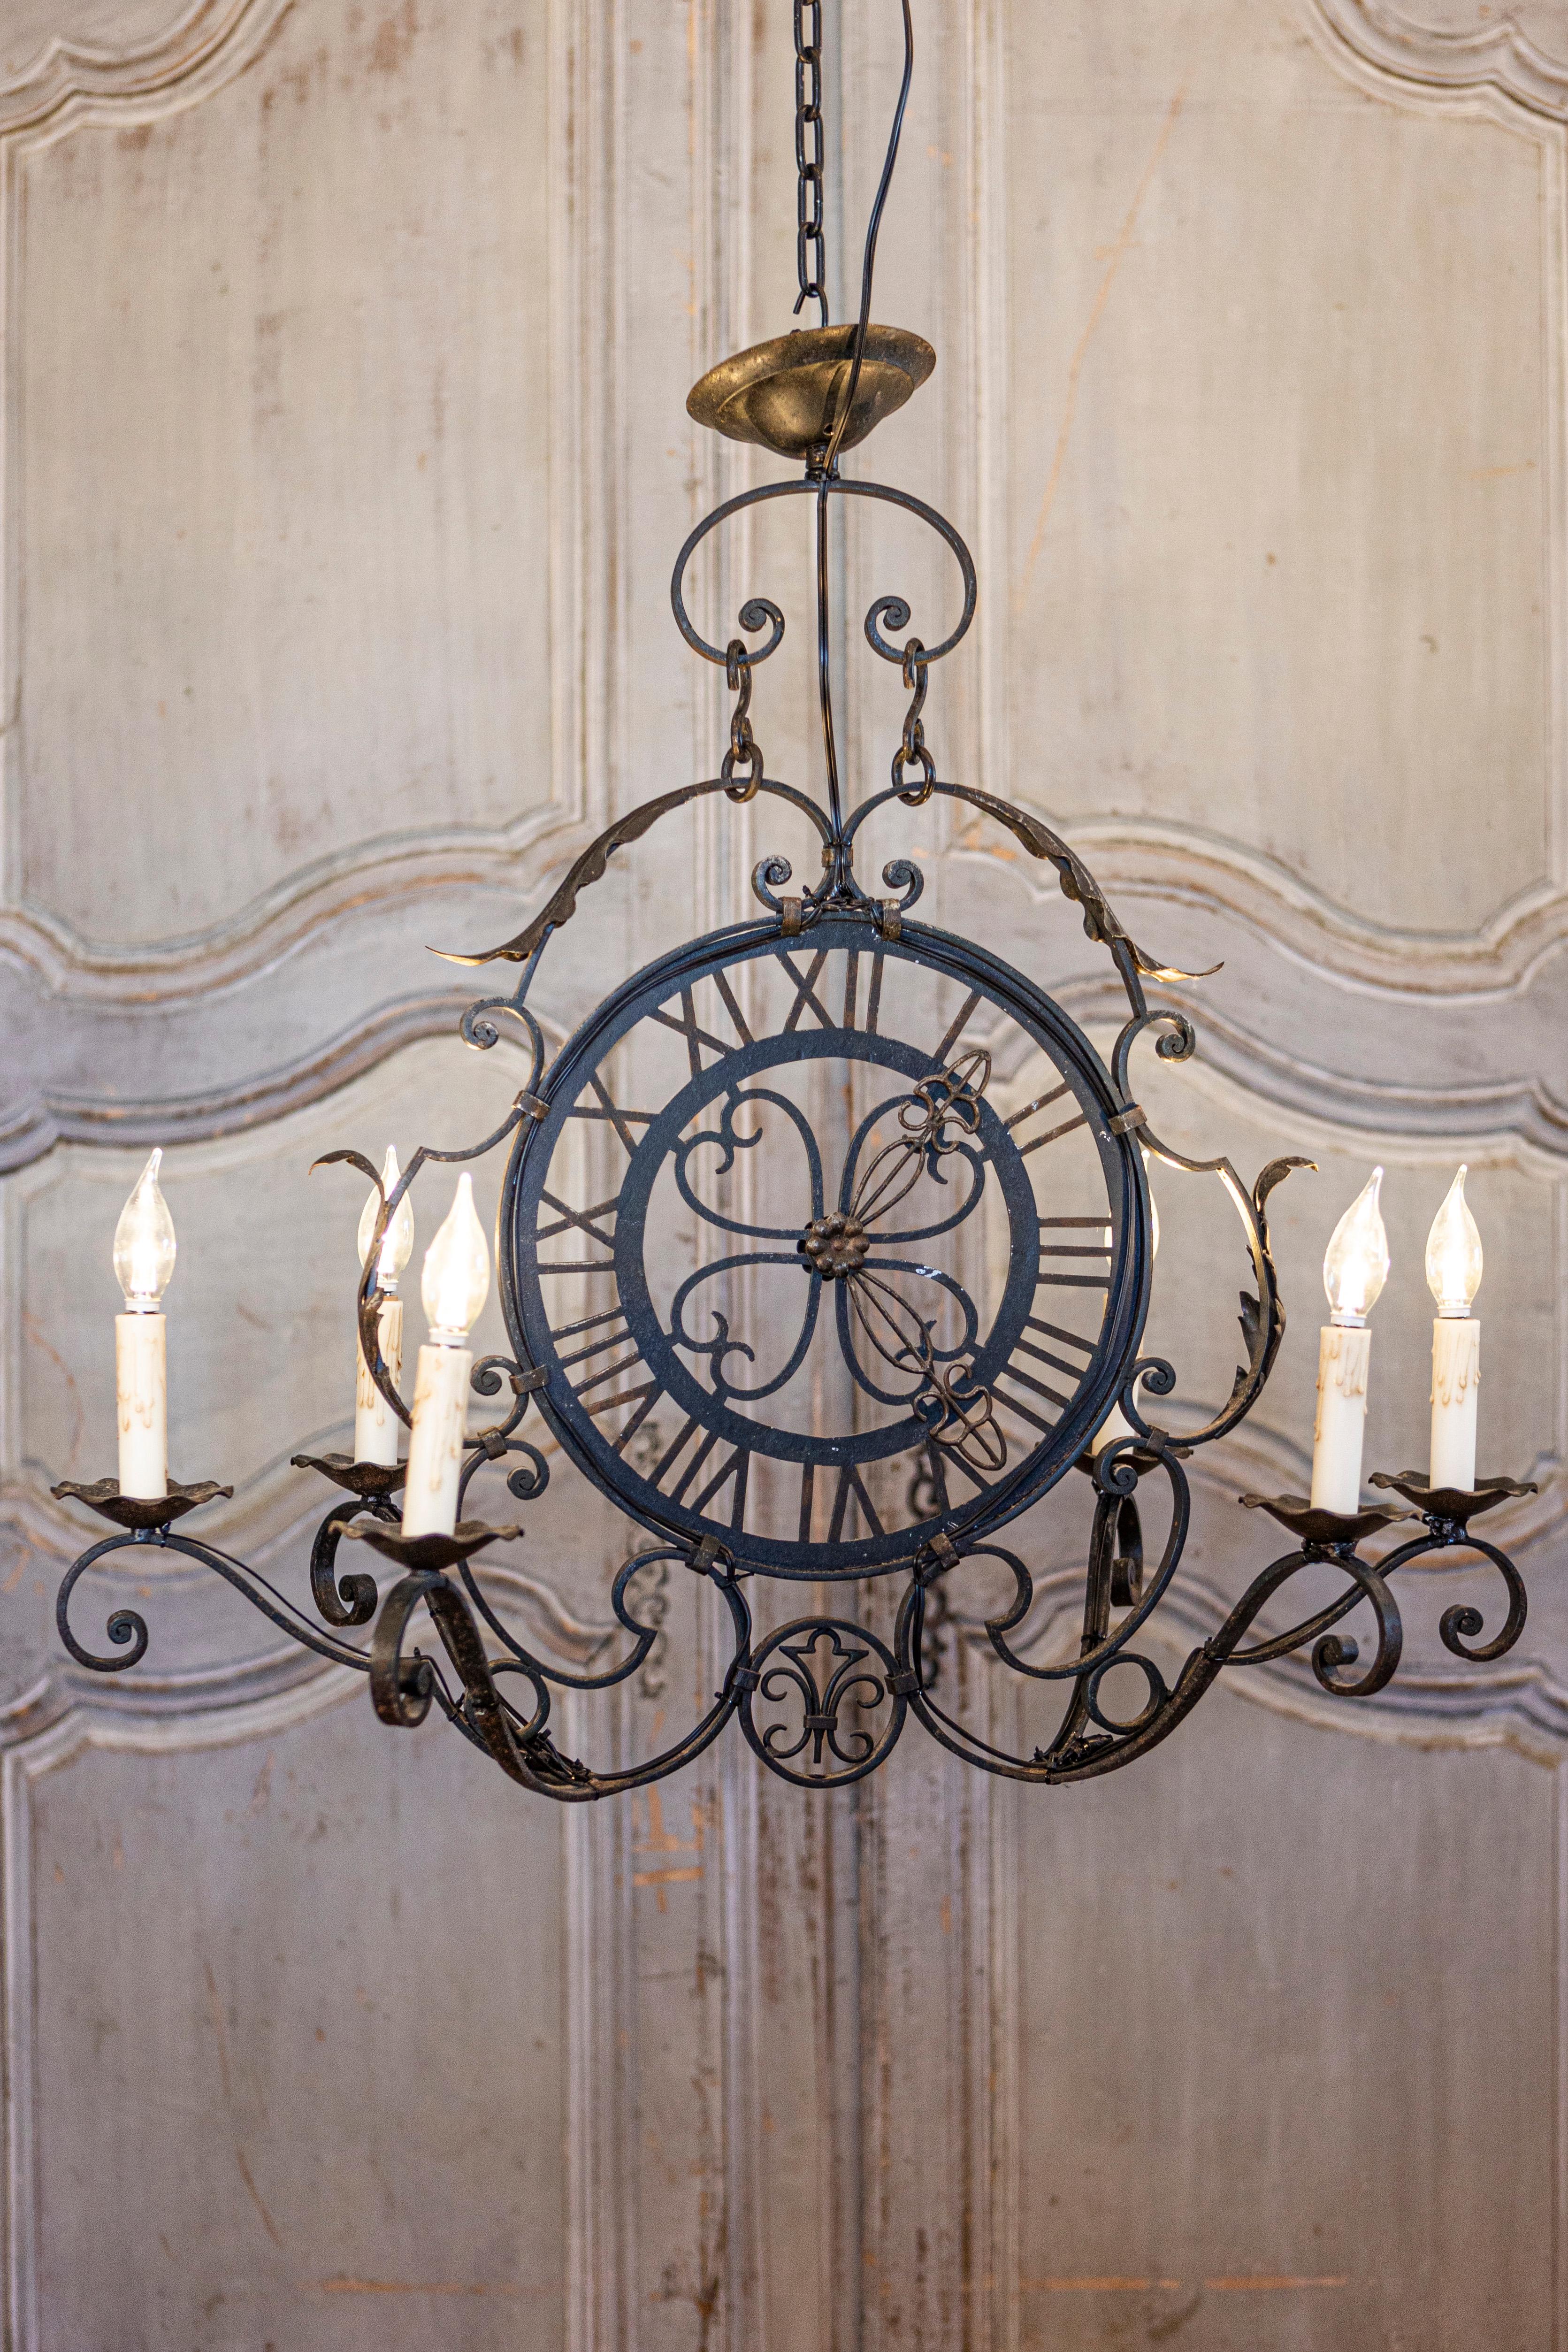 A French wrought-iron clock face chandelier from the 20th century with six scrolling arms and acanthus leaf motifs. This striking French wrought-iron chandelier, originating from the 20th century, marries functionality with artistic design. Its